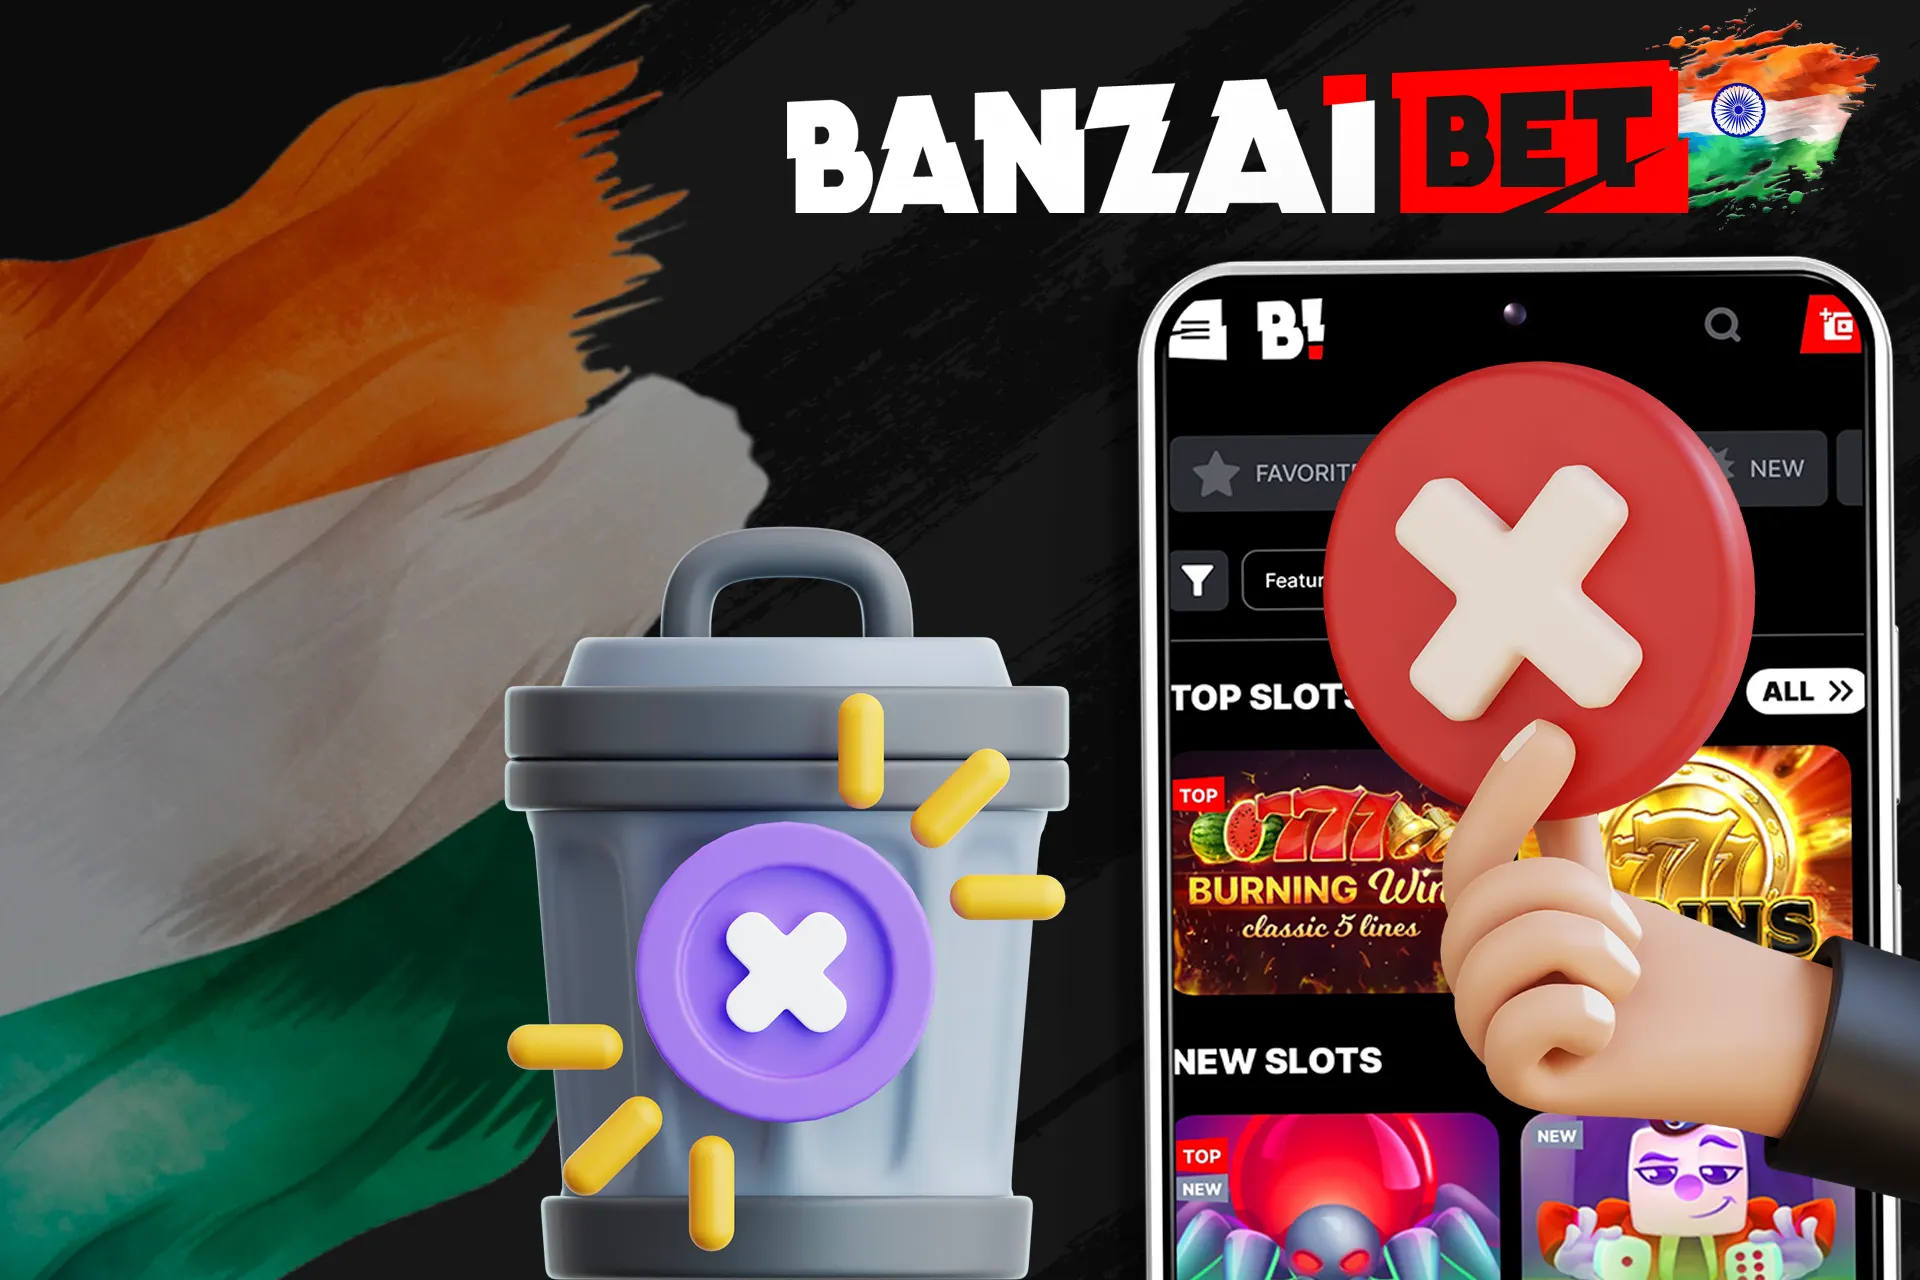 Find out how to delete Banzaibet India mobile application